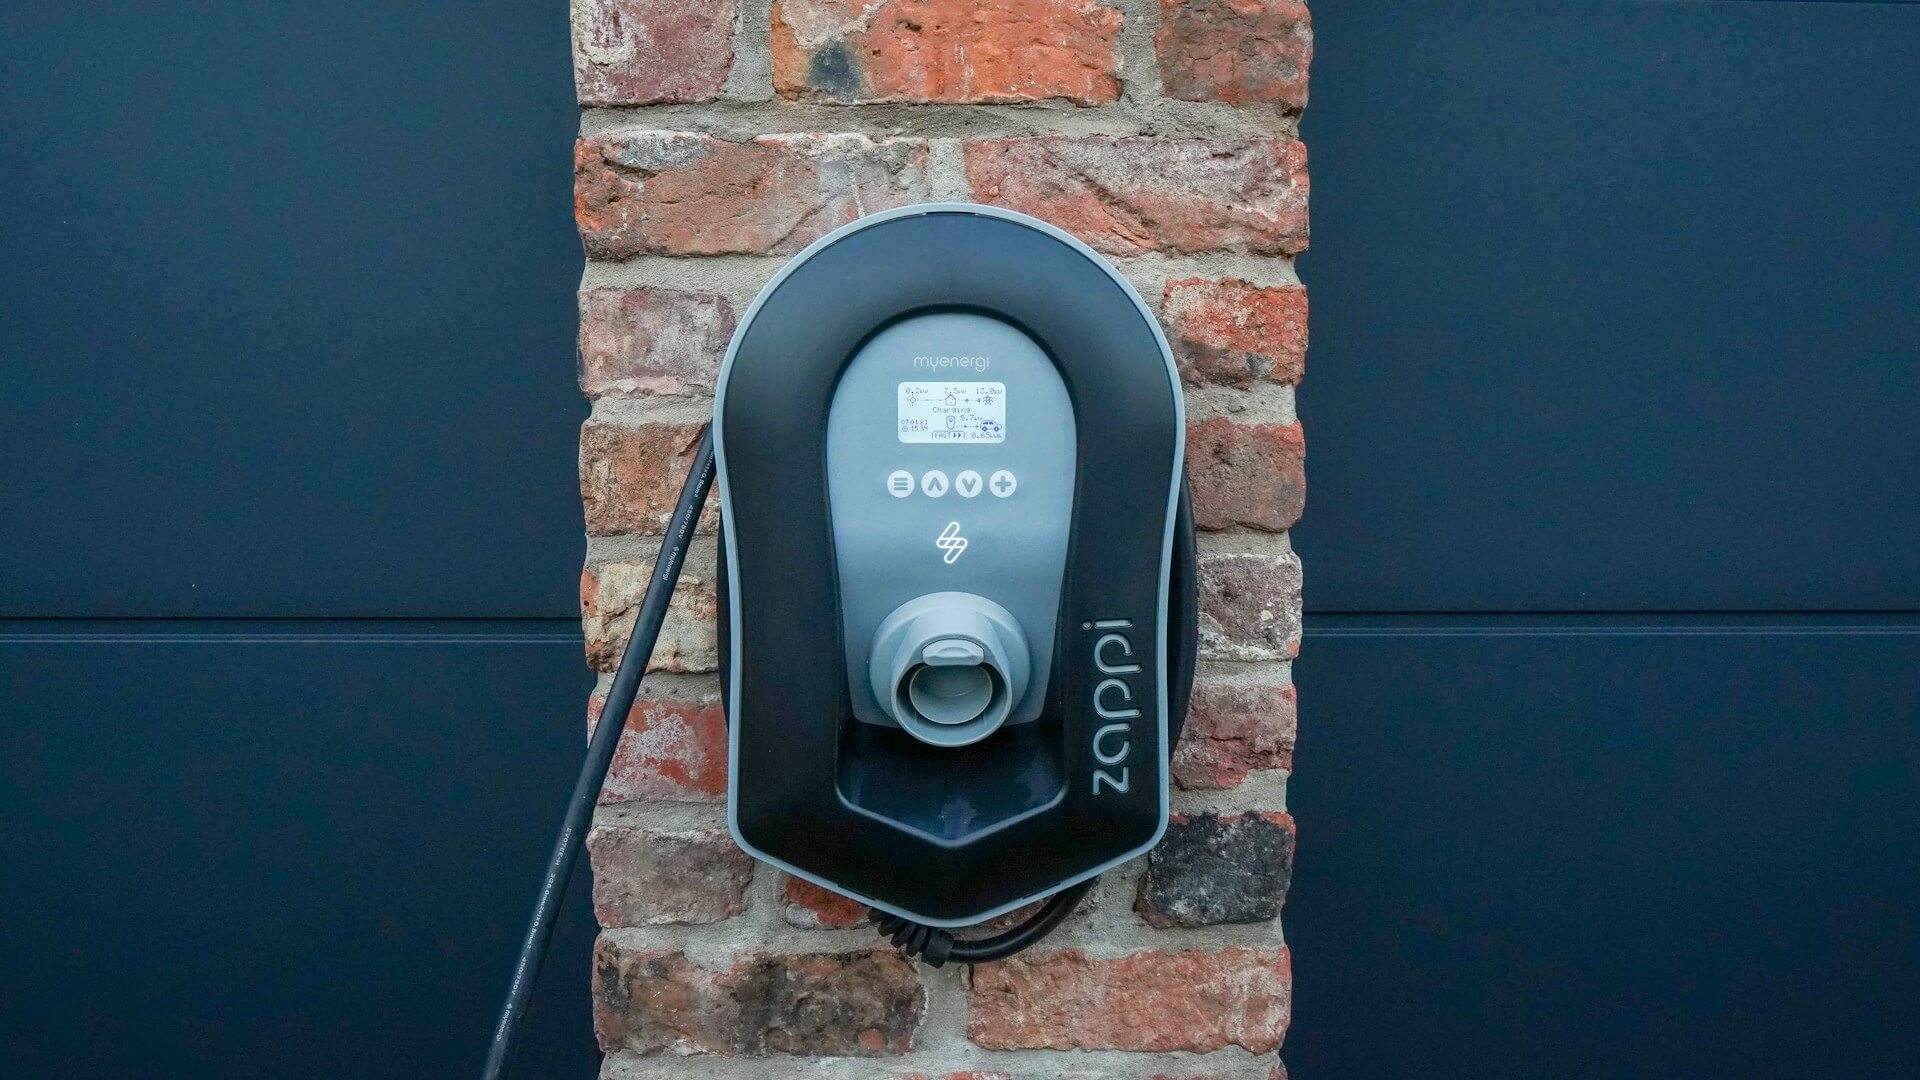 car charger